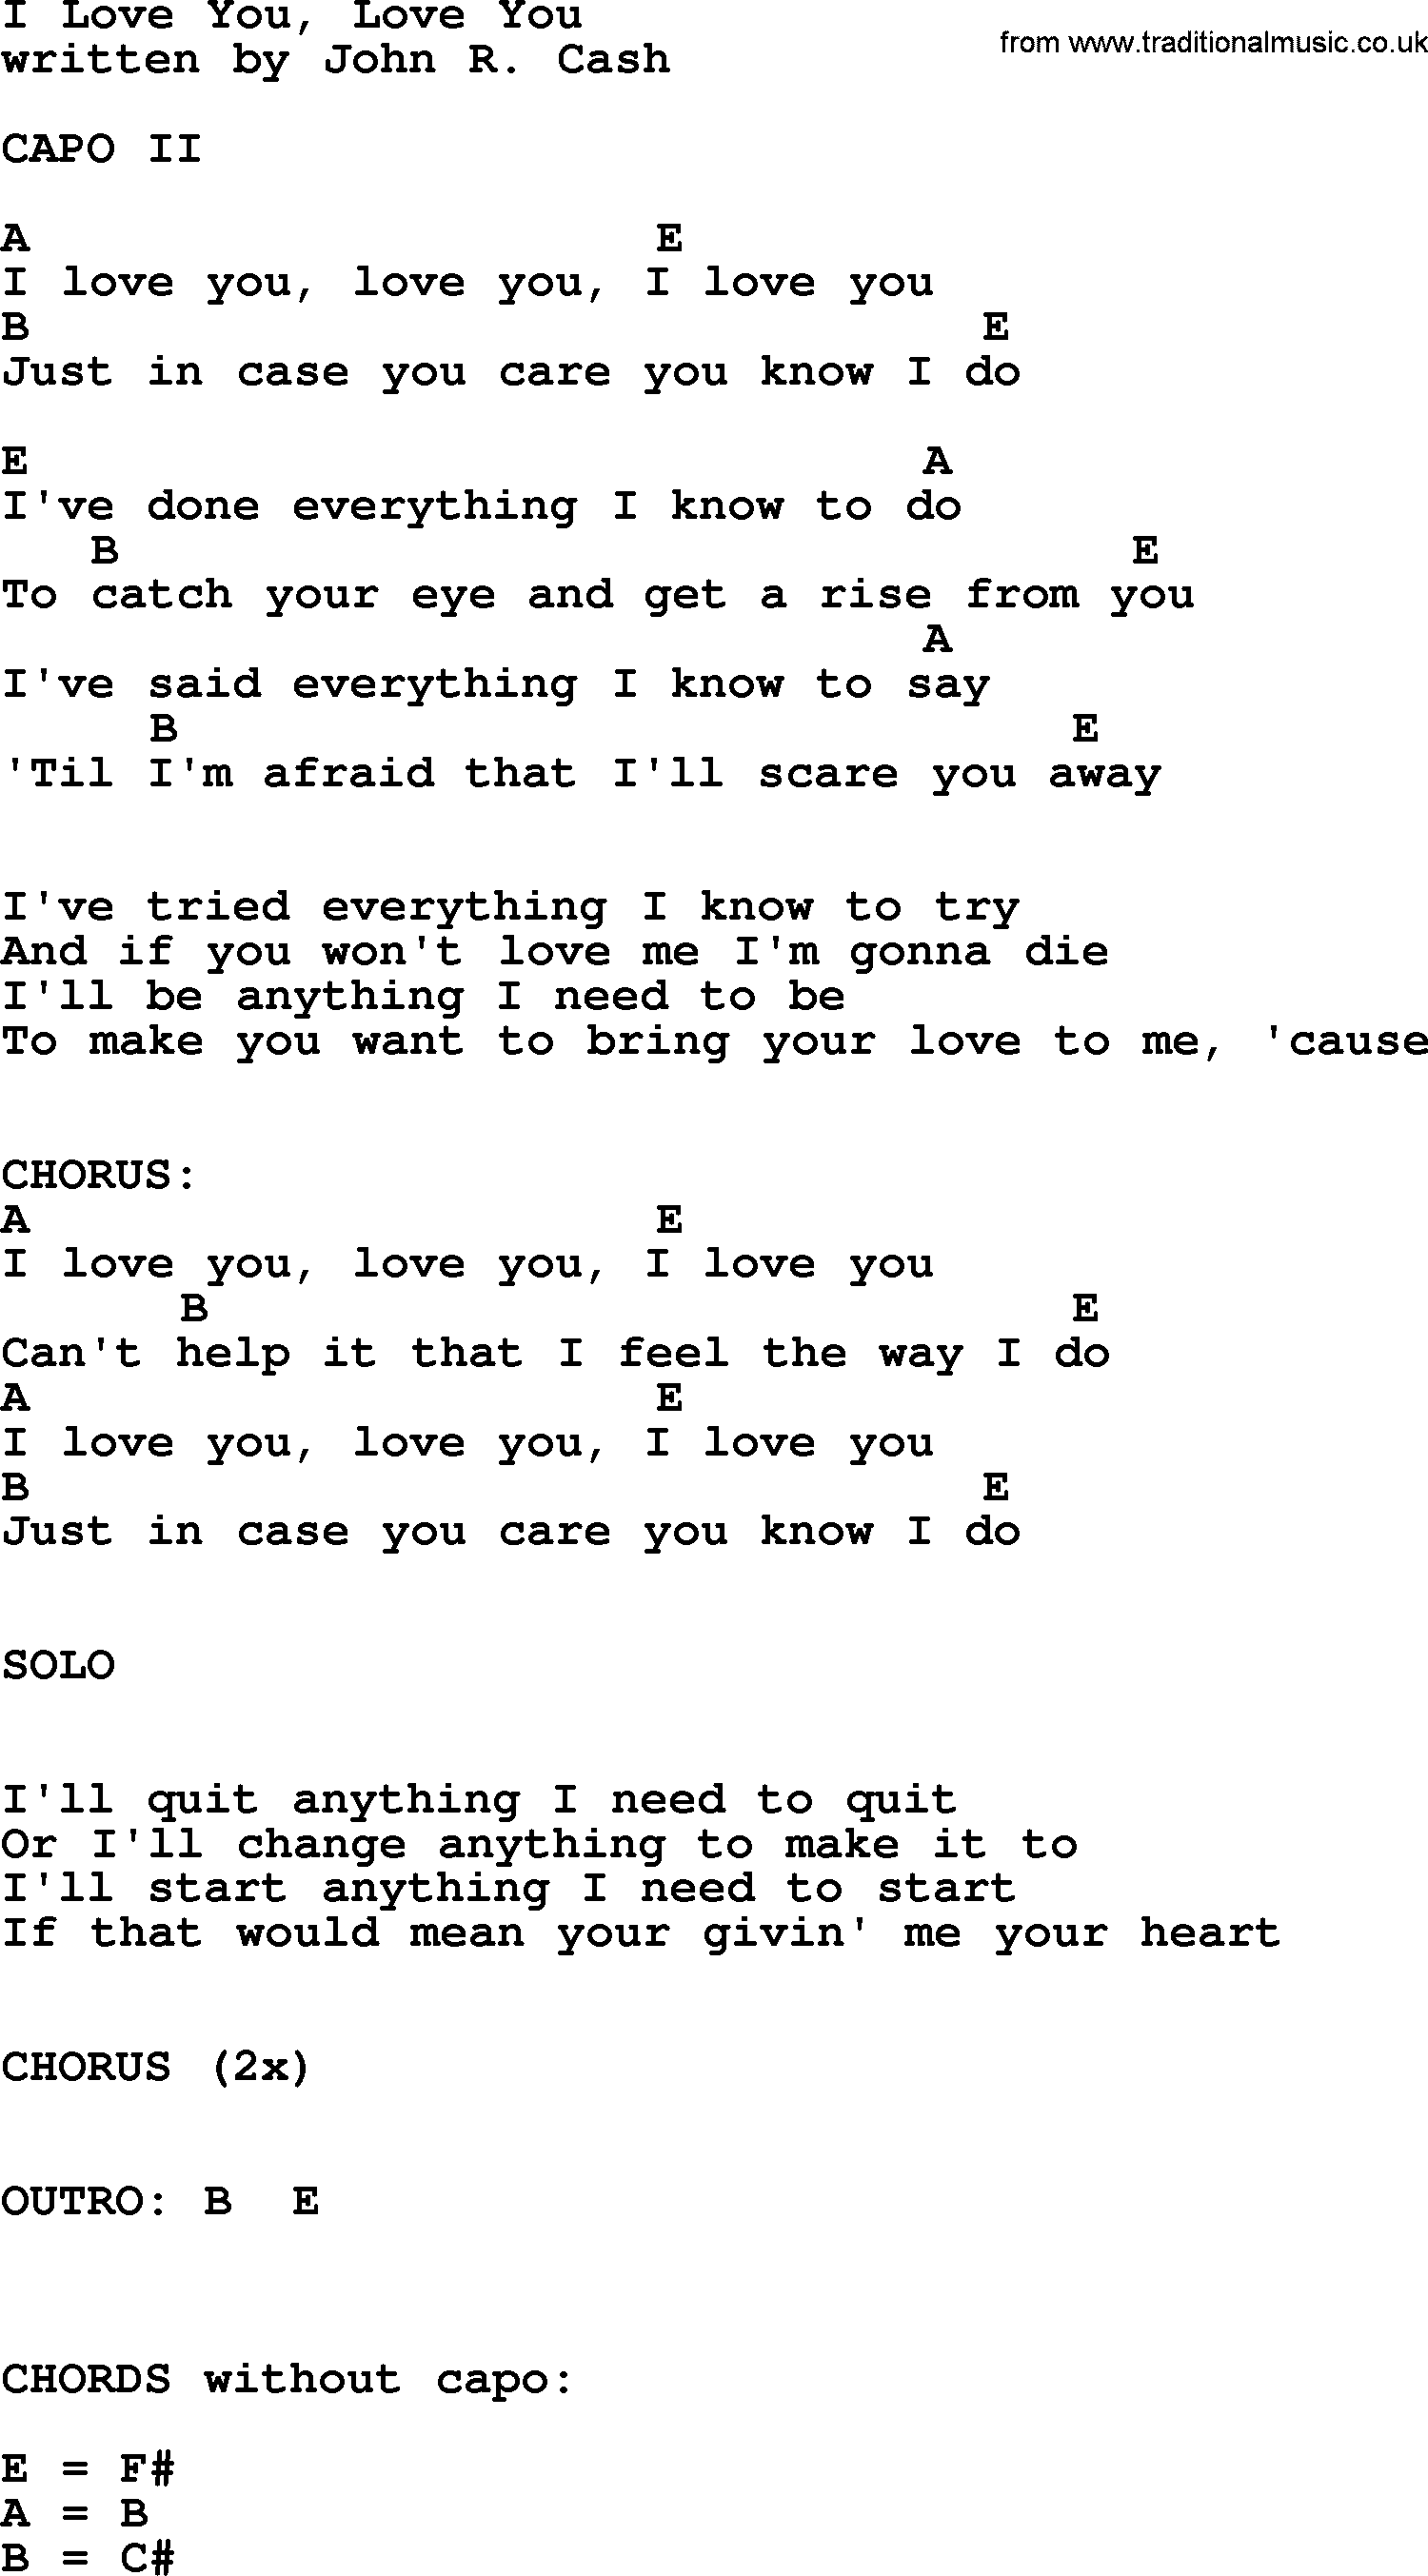 Johnny Cash song I Love You, Love You, lyrics and chords